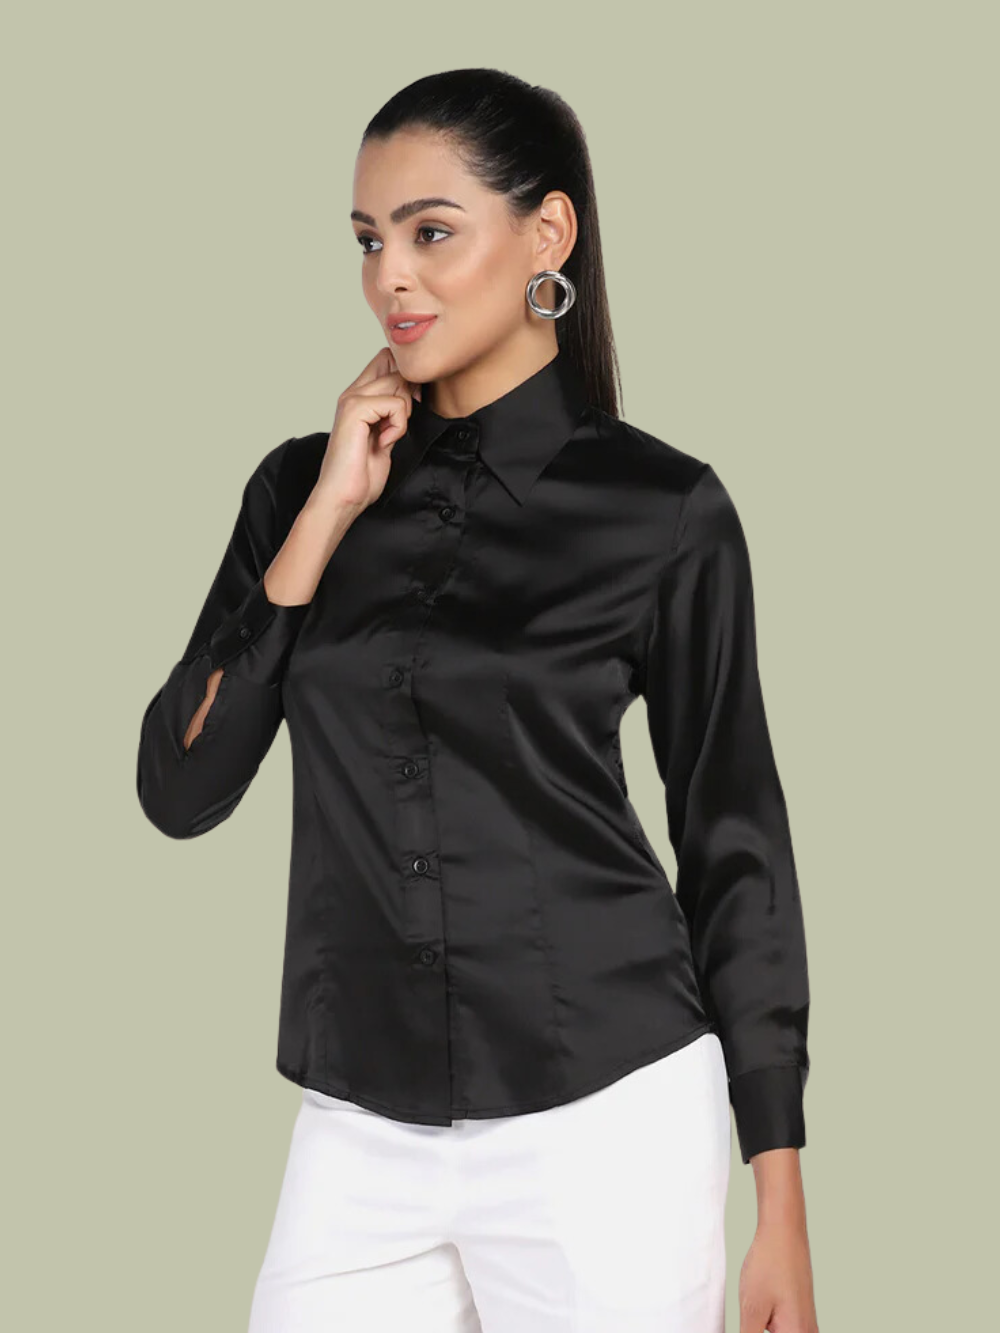 Shop for Formal Office Wear tops for Ladies - Power Sutra